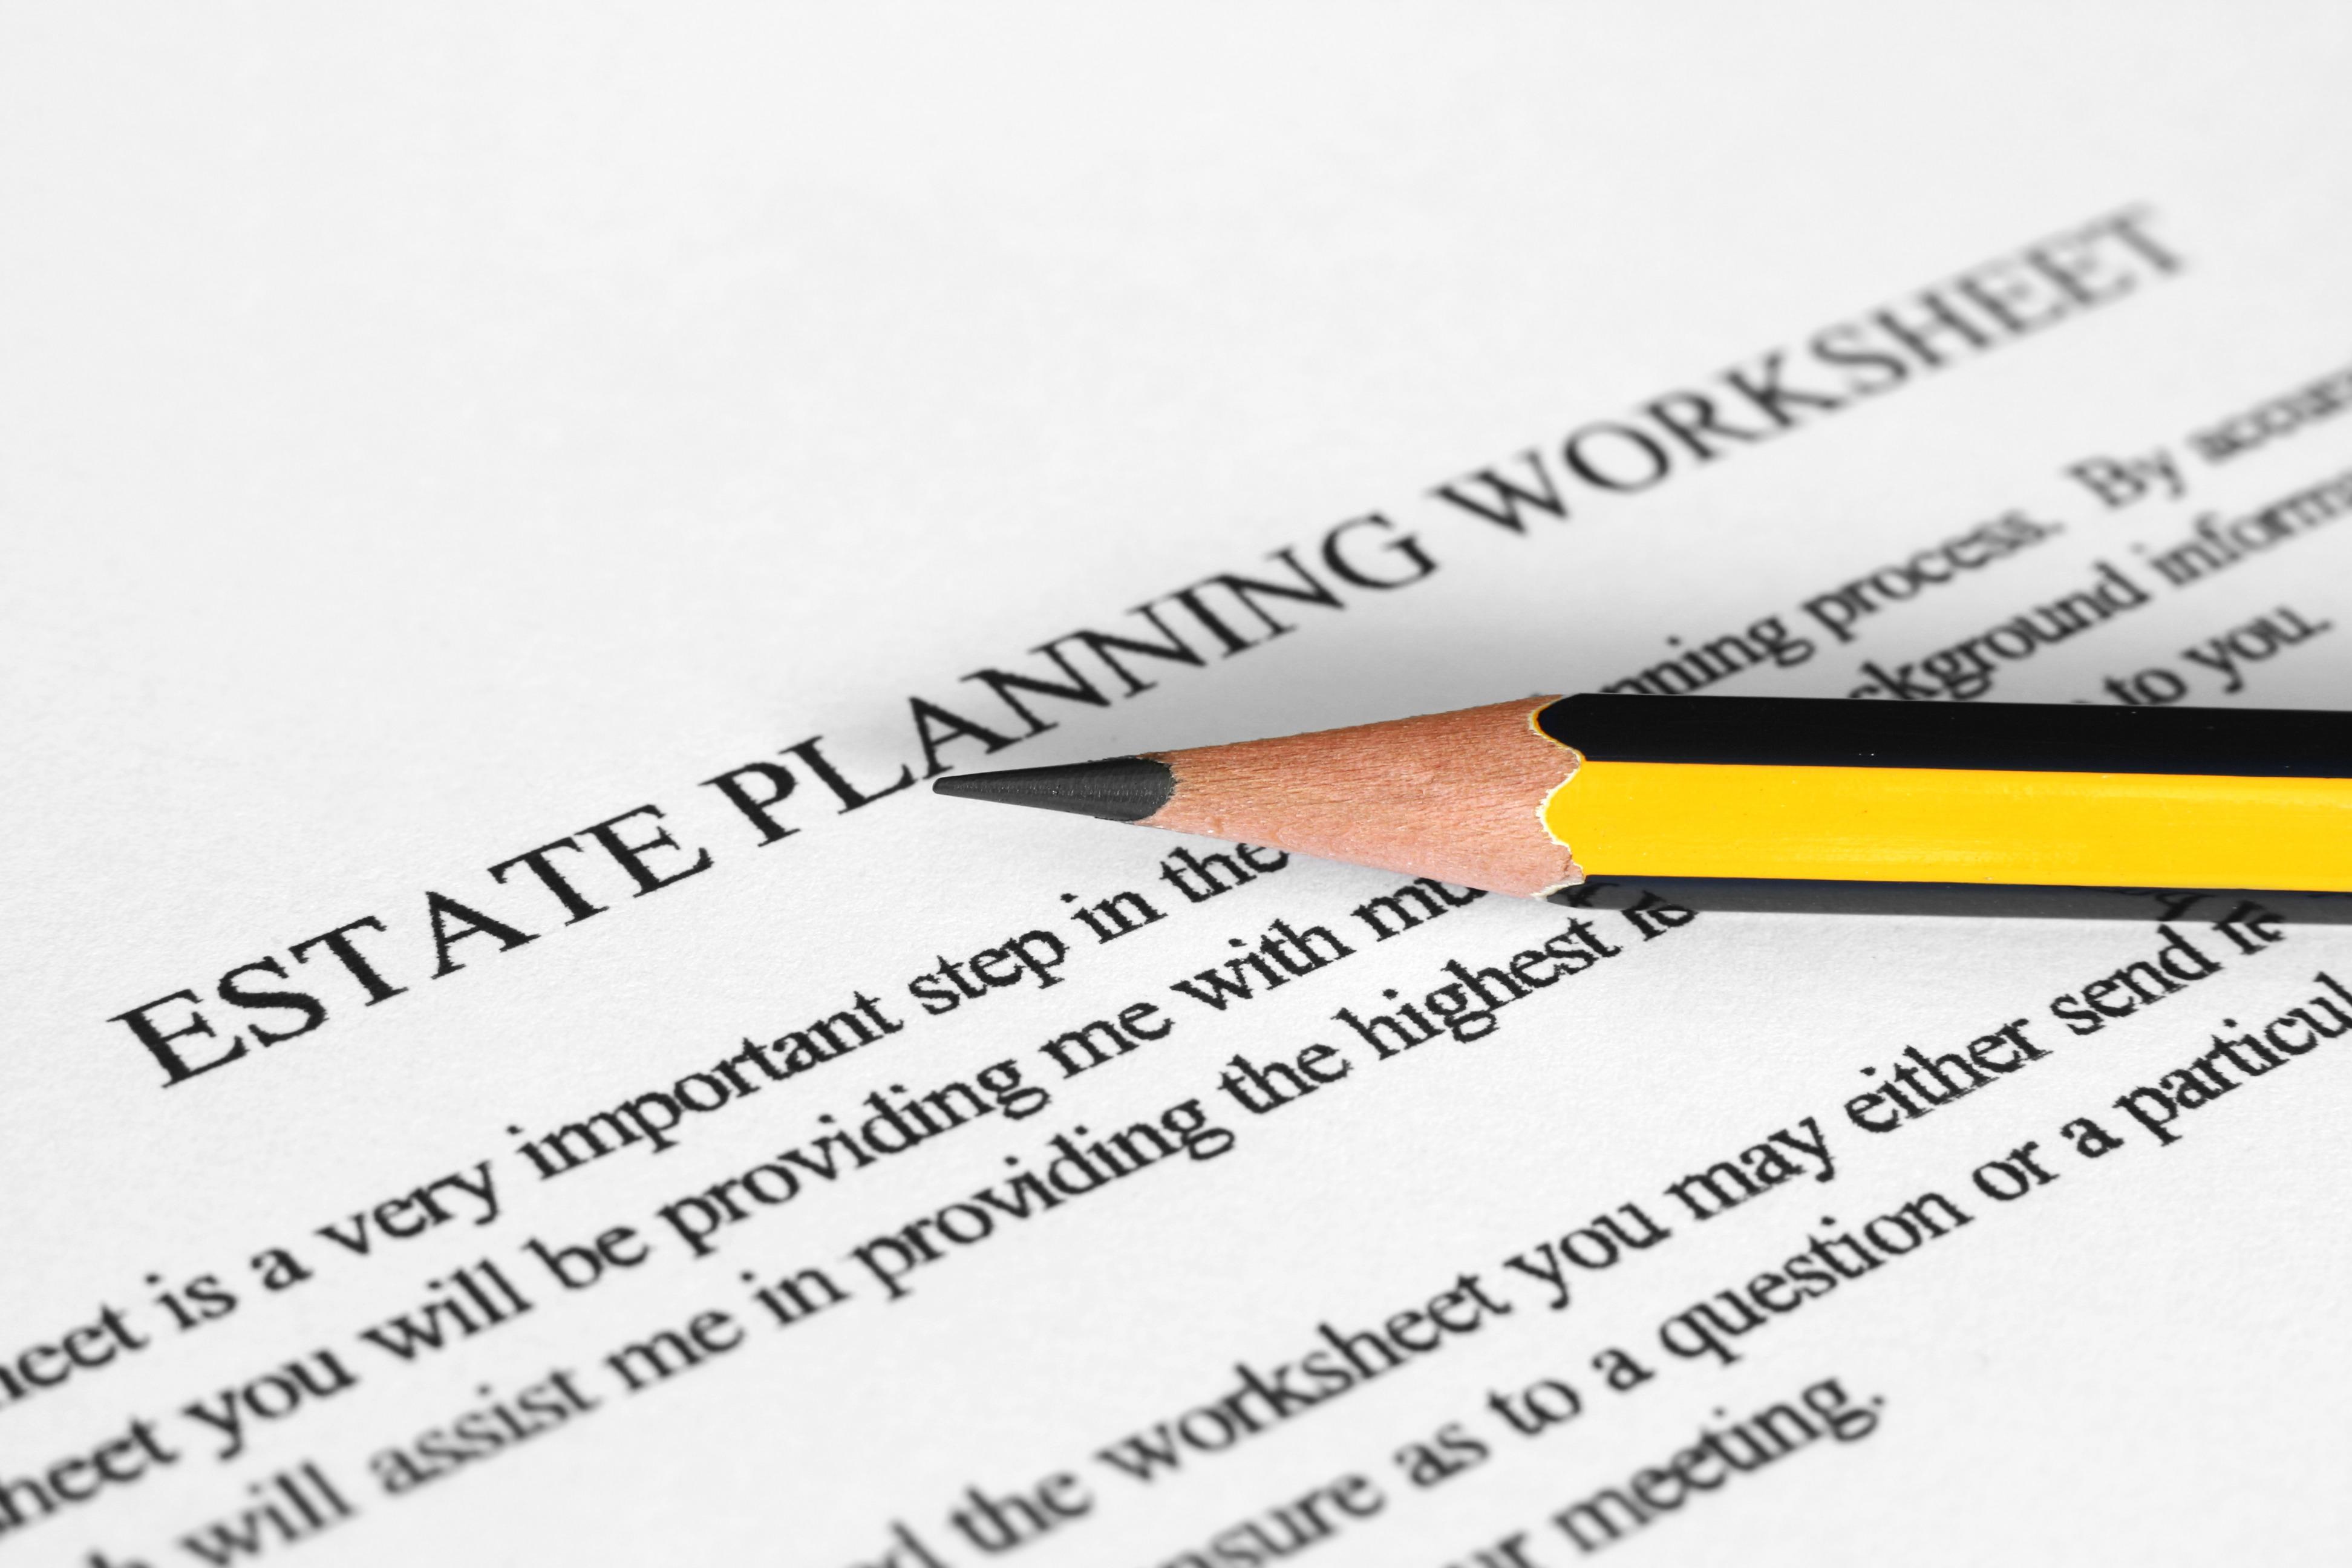 The New Jersey Estate Tax is applied against estates larger than $675,000. Don't draft your estate plan or will without the help of a NJ estate planning attorney who can help you minimize or altogether avoid an estate tax bill. At the Law Offices of Marques Goetsch, we can develop a customized estate plan just for you. Call today!